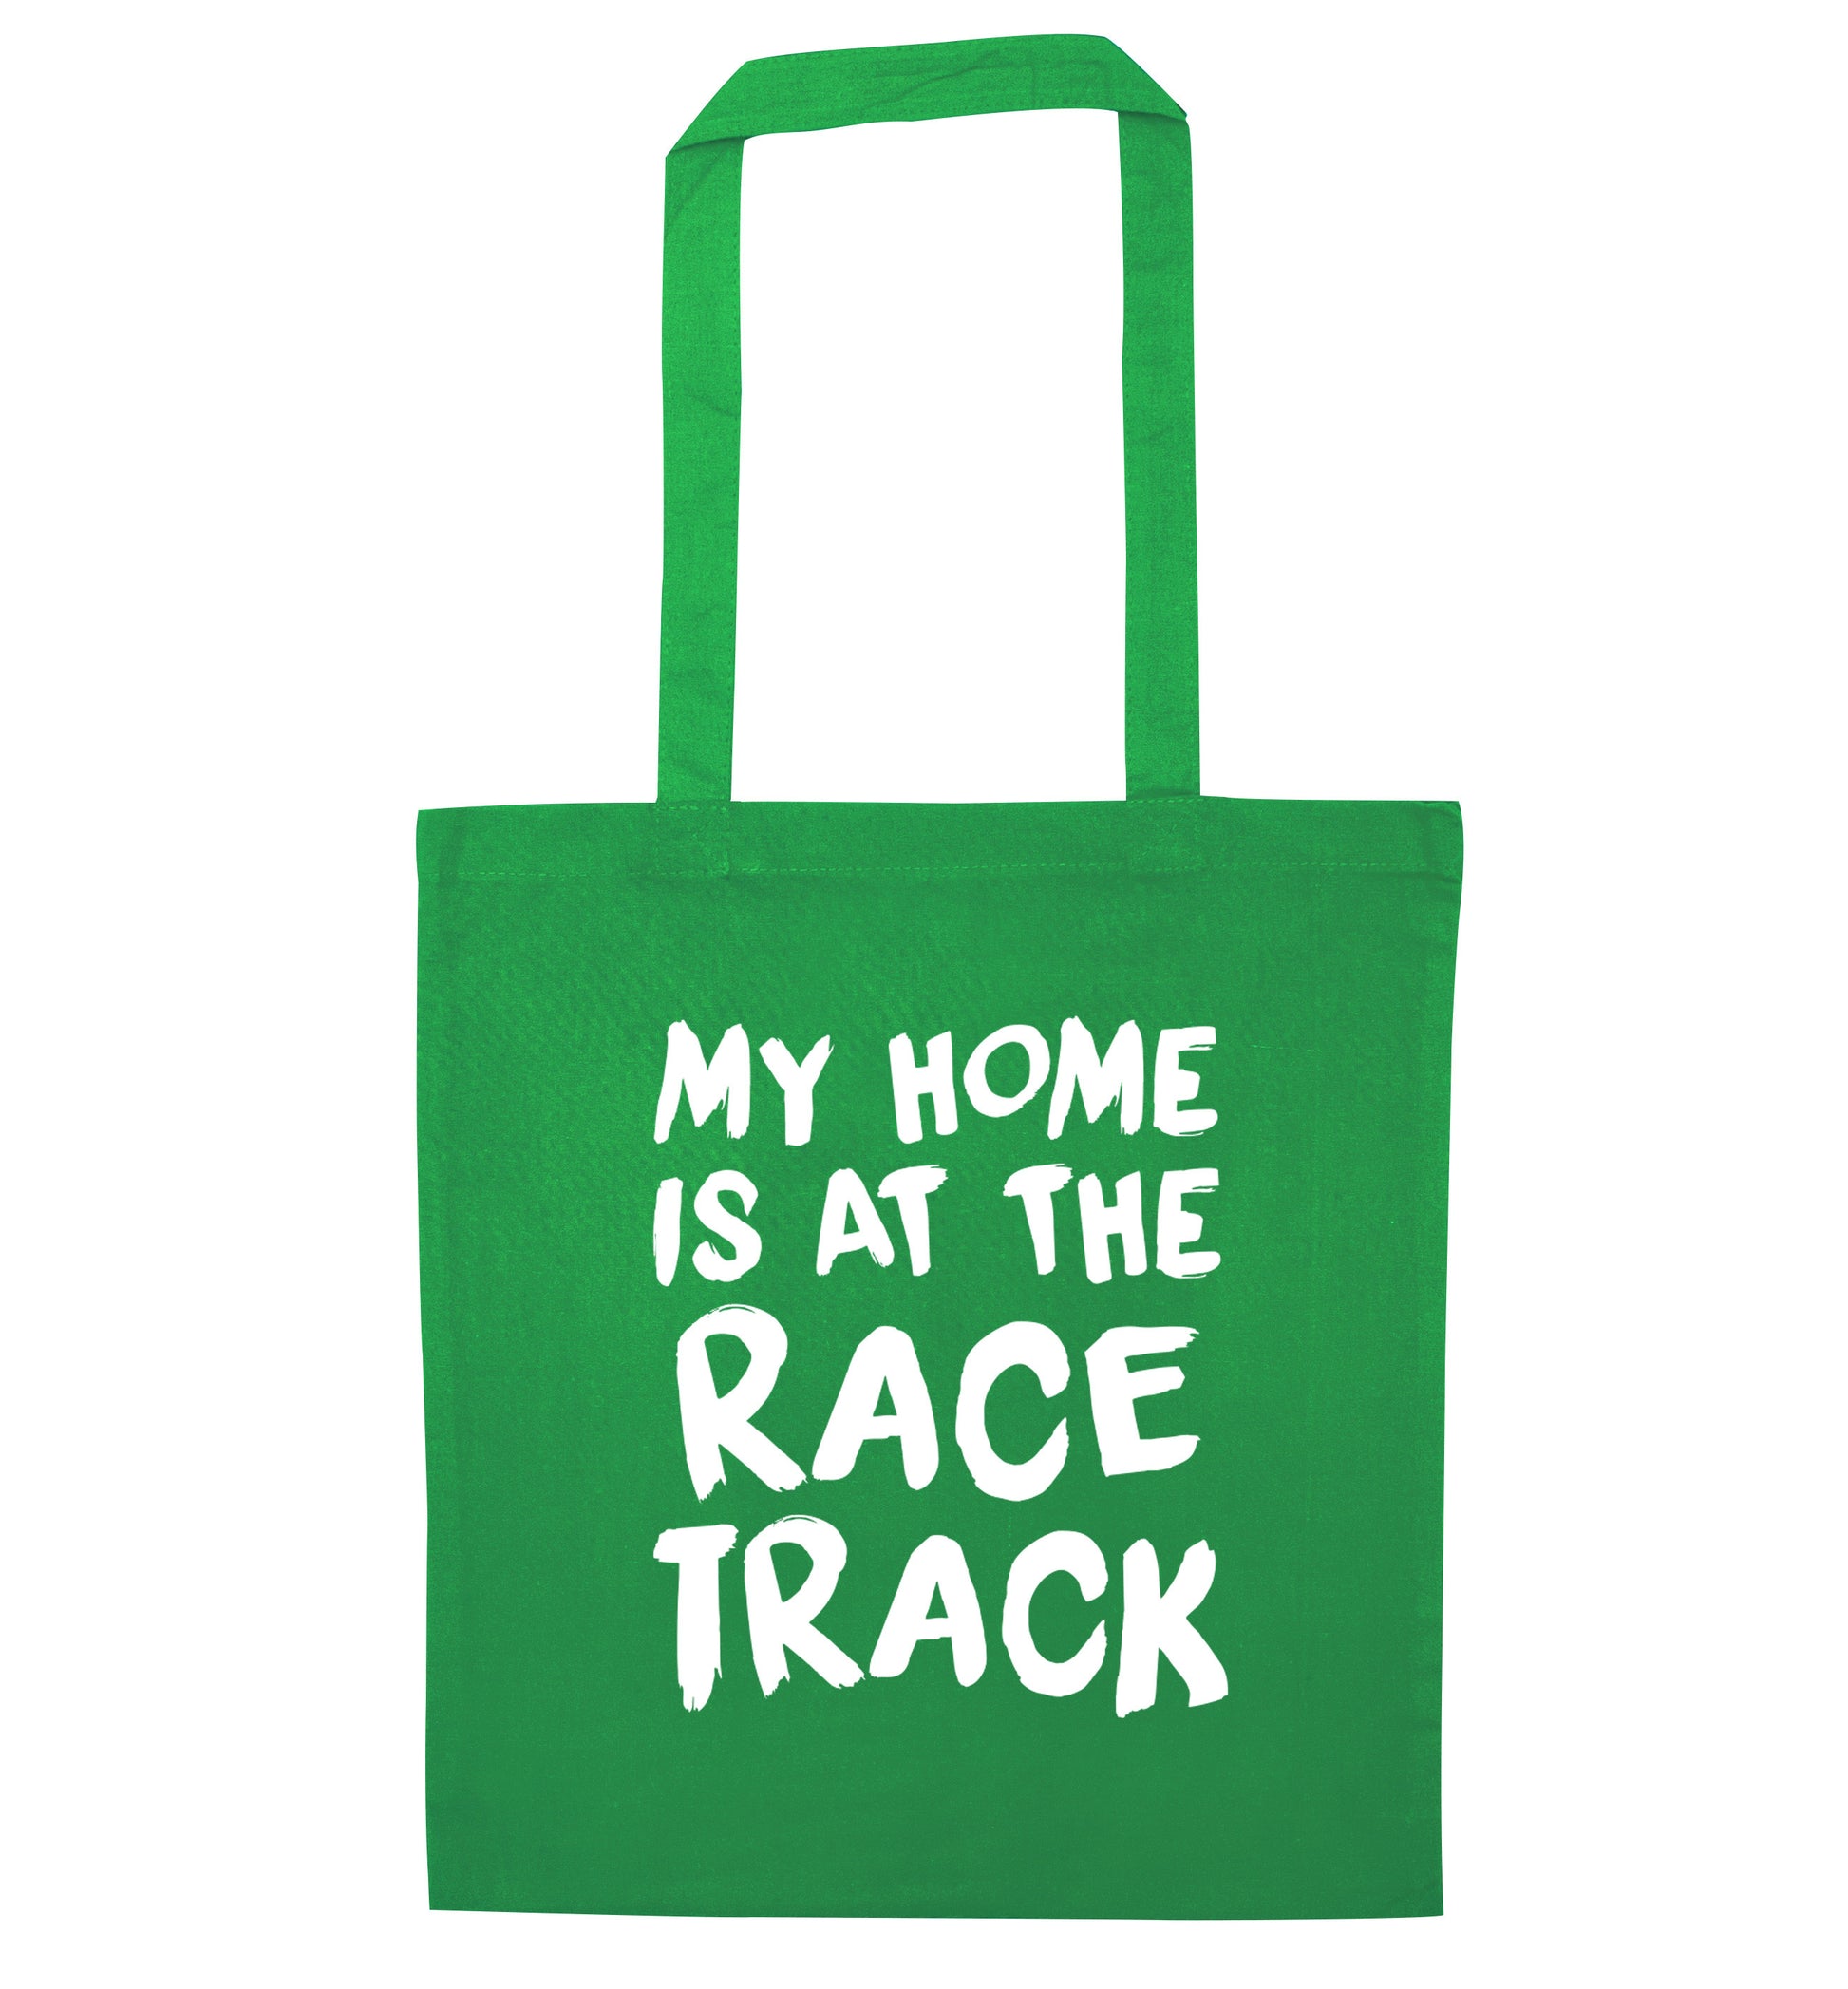 My home is at the race track green tote bag